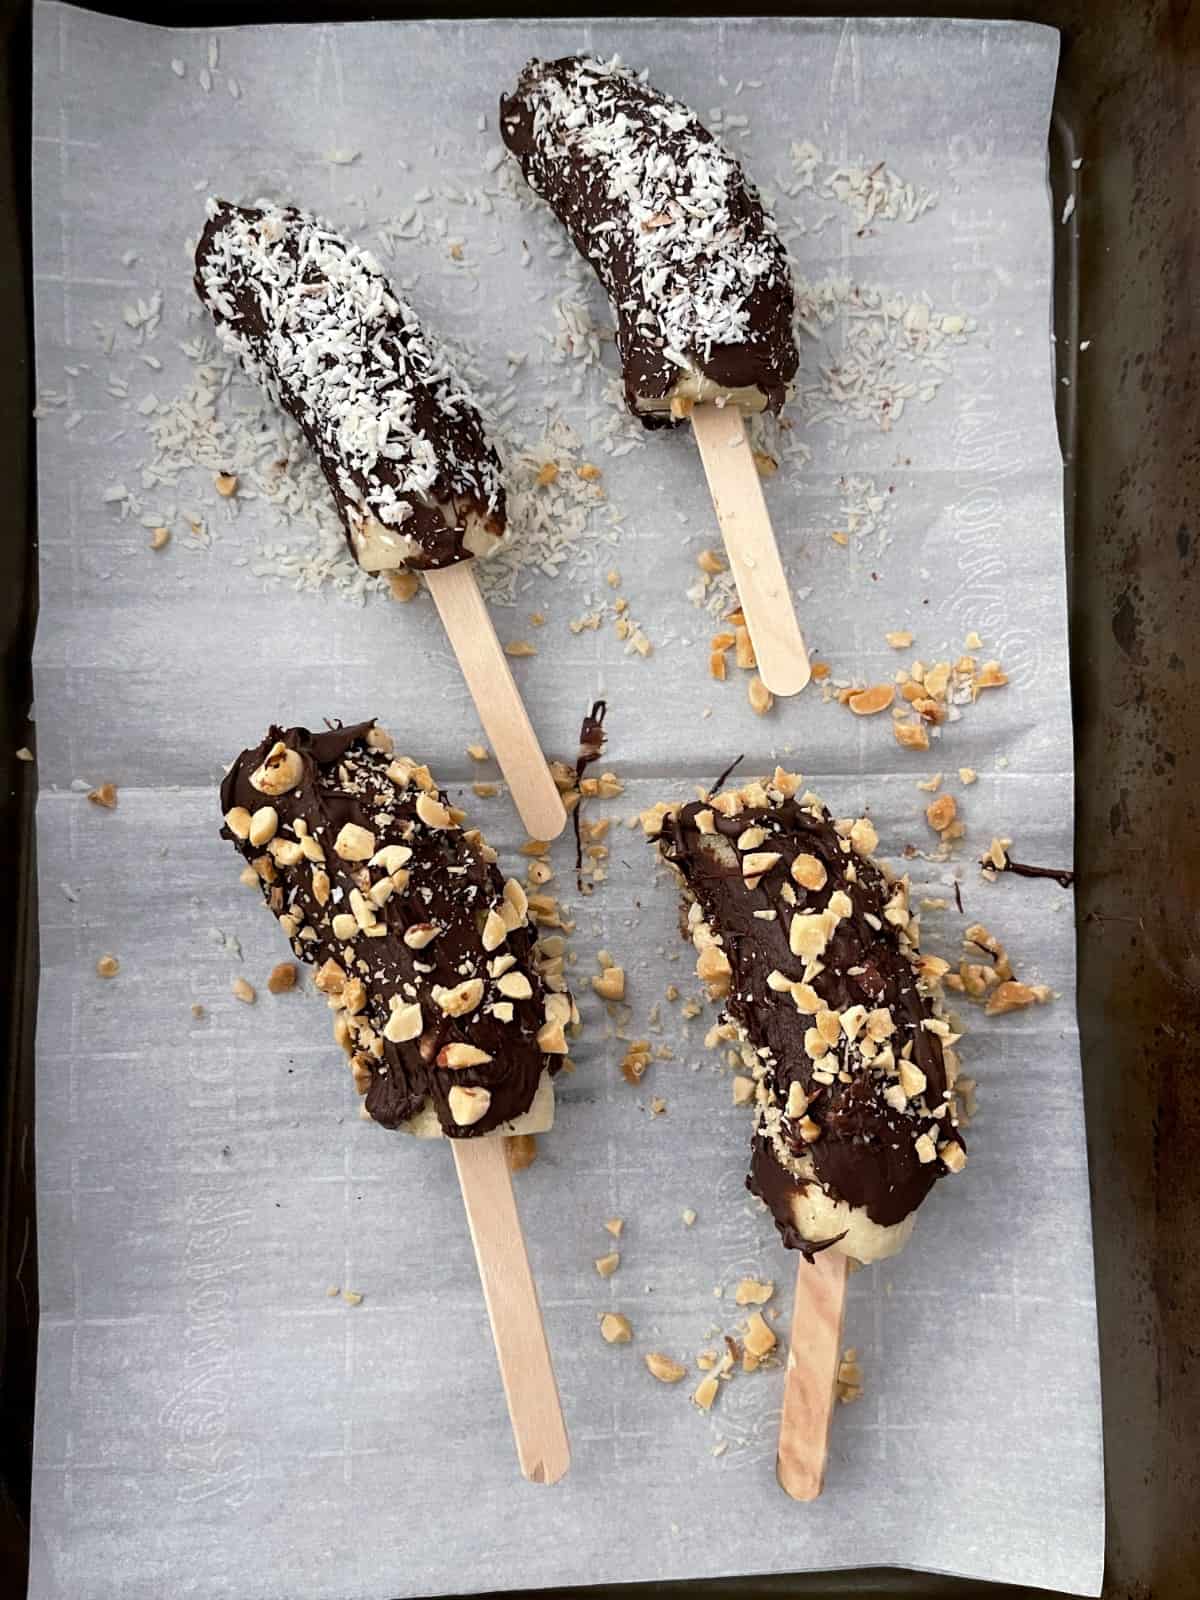 Chocolate dipped bananas coated with shredded coconut and chopped peanuts.